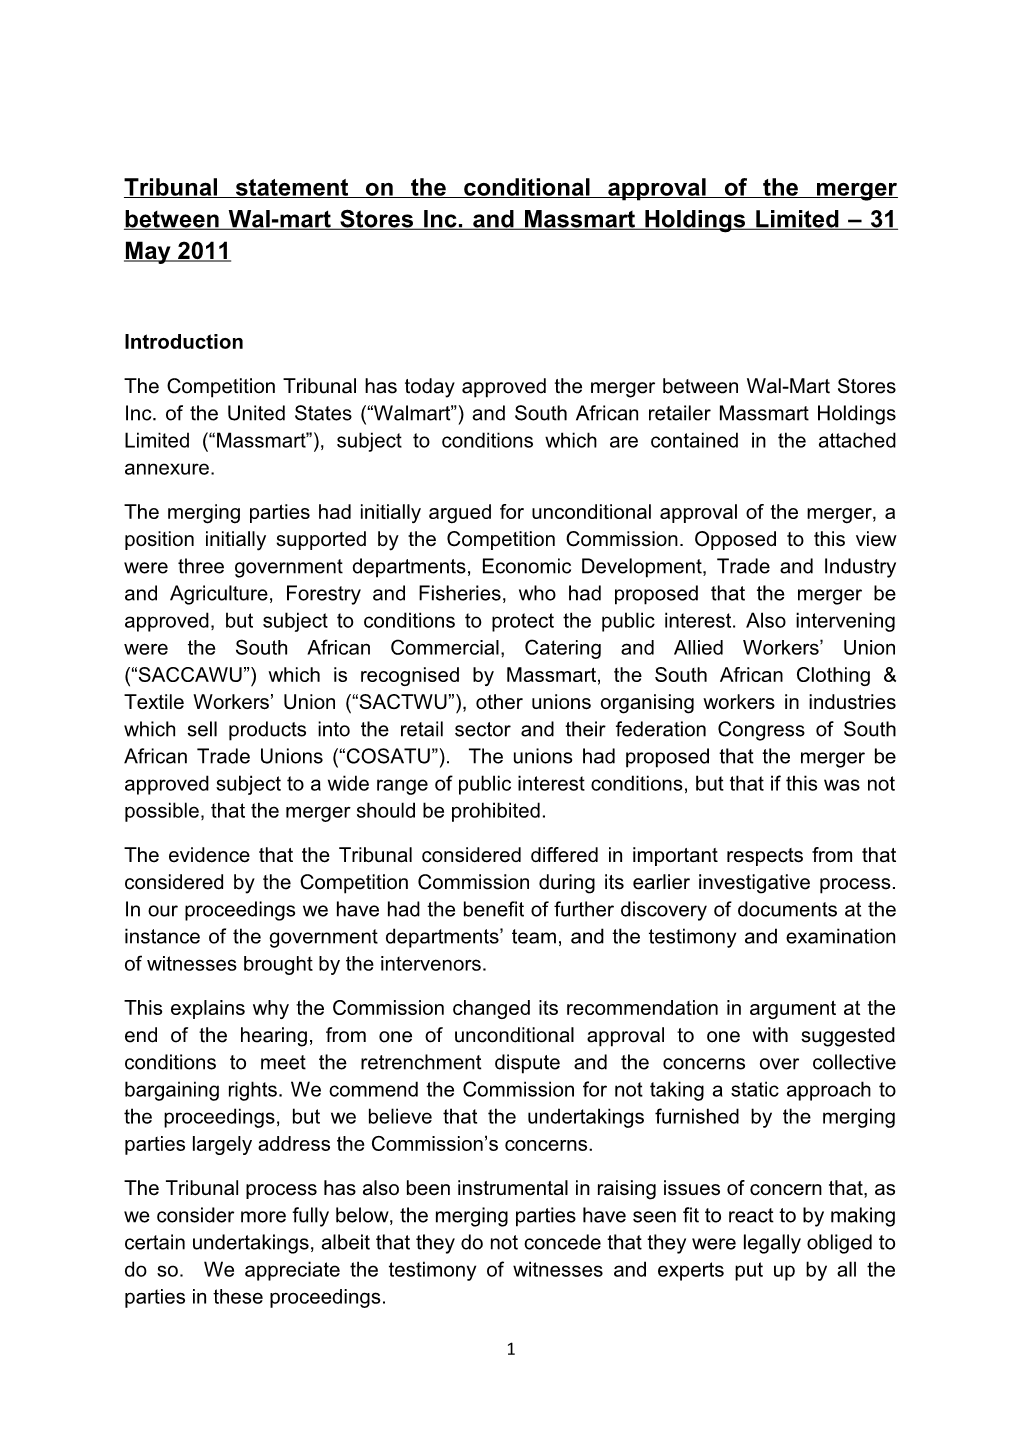 Tribunal Statement on the Conditional Approval of the Merger Between Wal-Mart Stores Inc